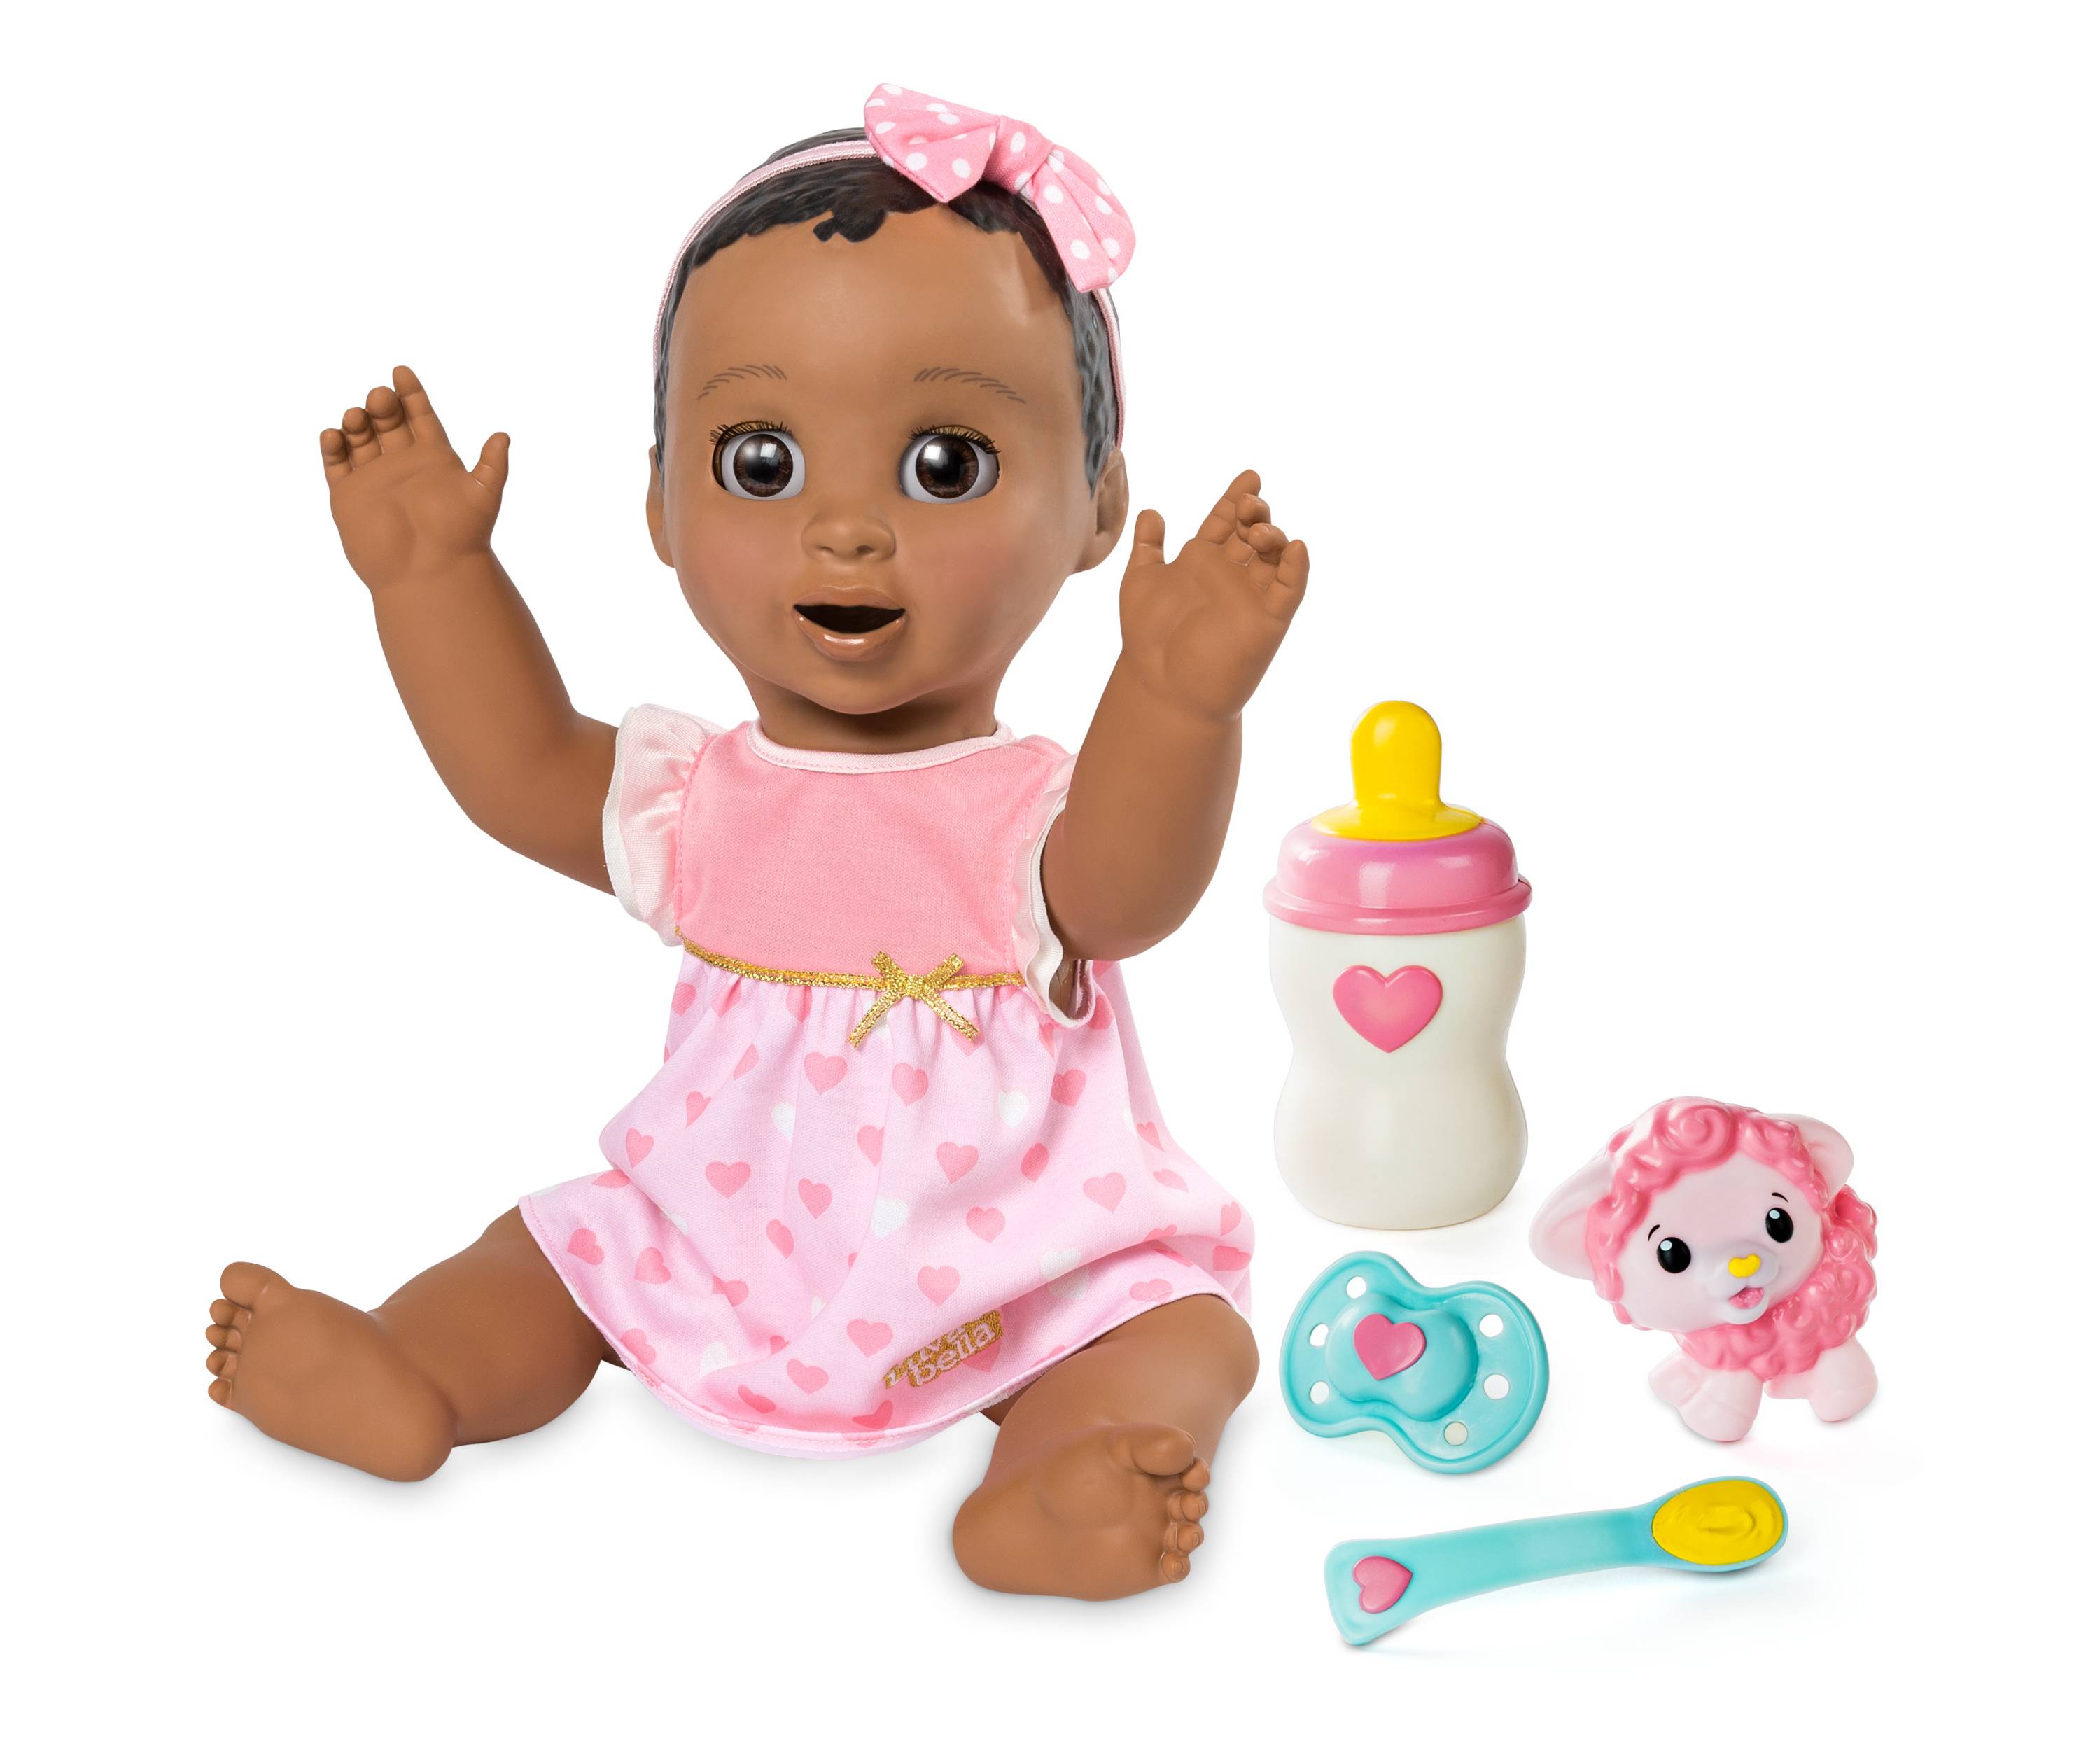 luvabella baby doll target